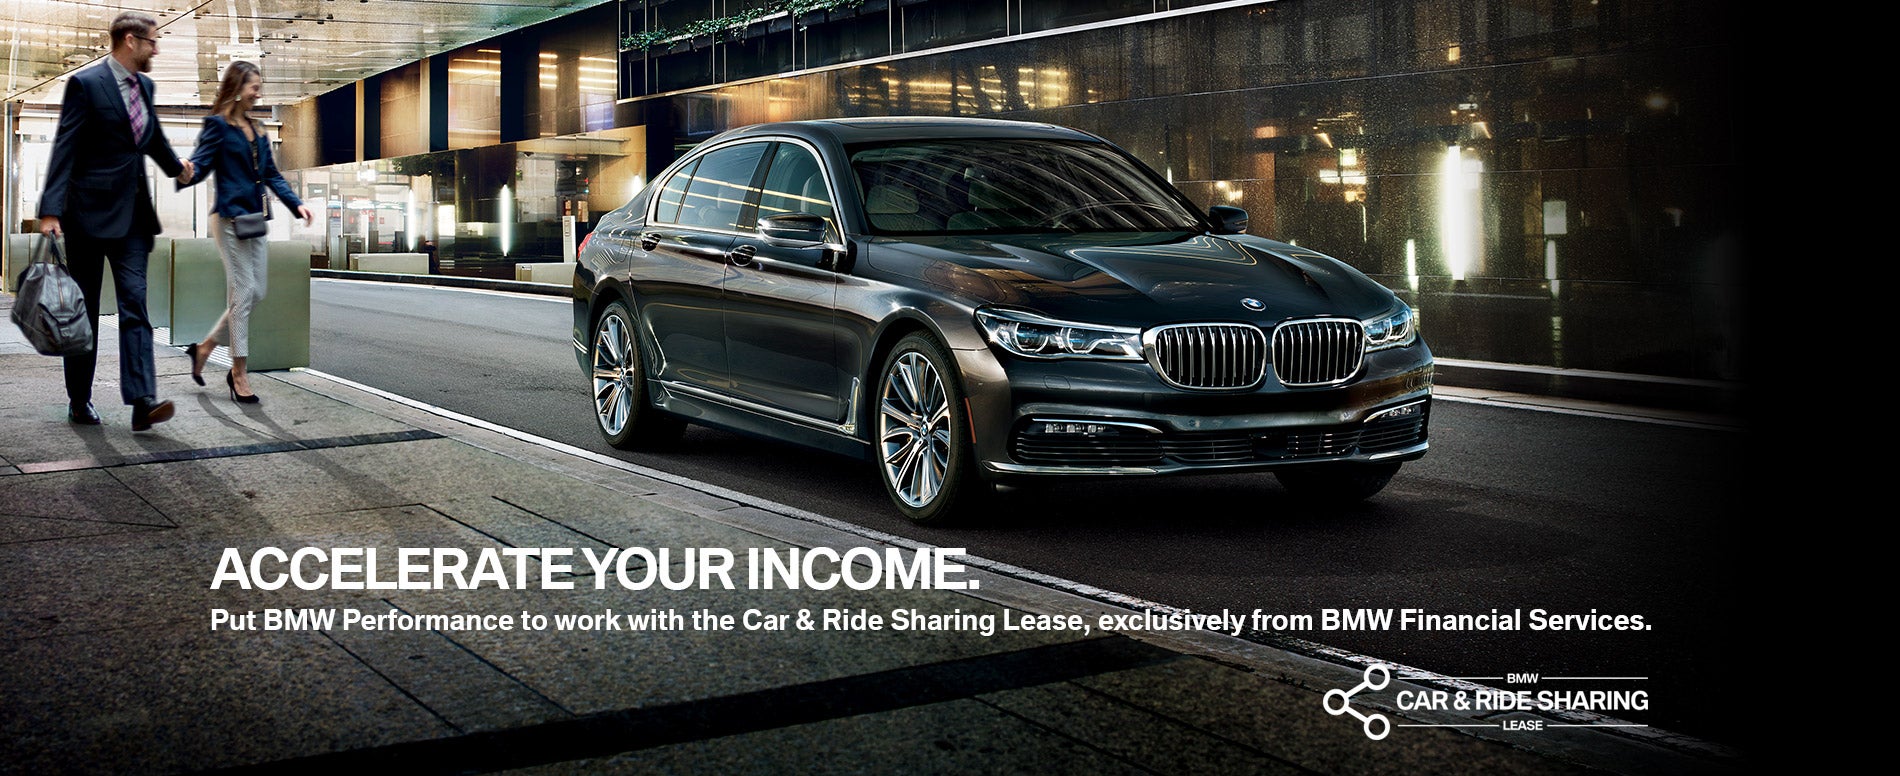 The BMW Car & Ride Sharing Lease at BMW of Palm Springs in Palm Springs CA